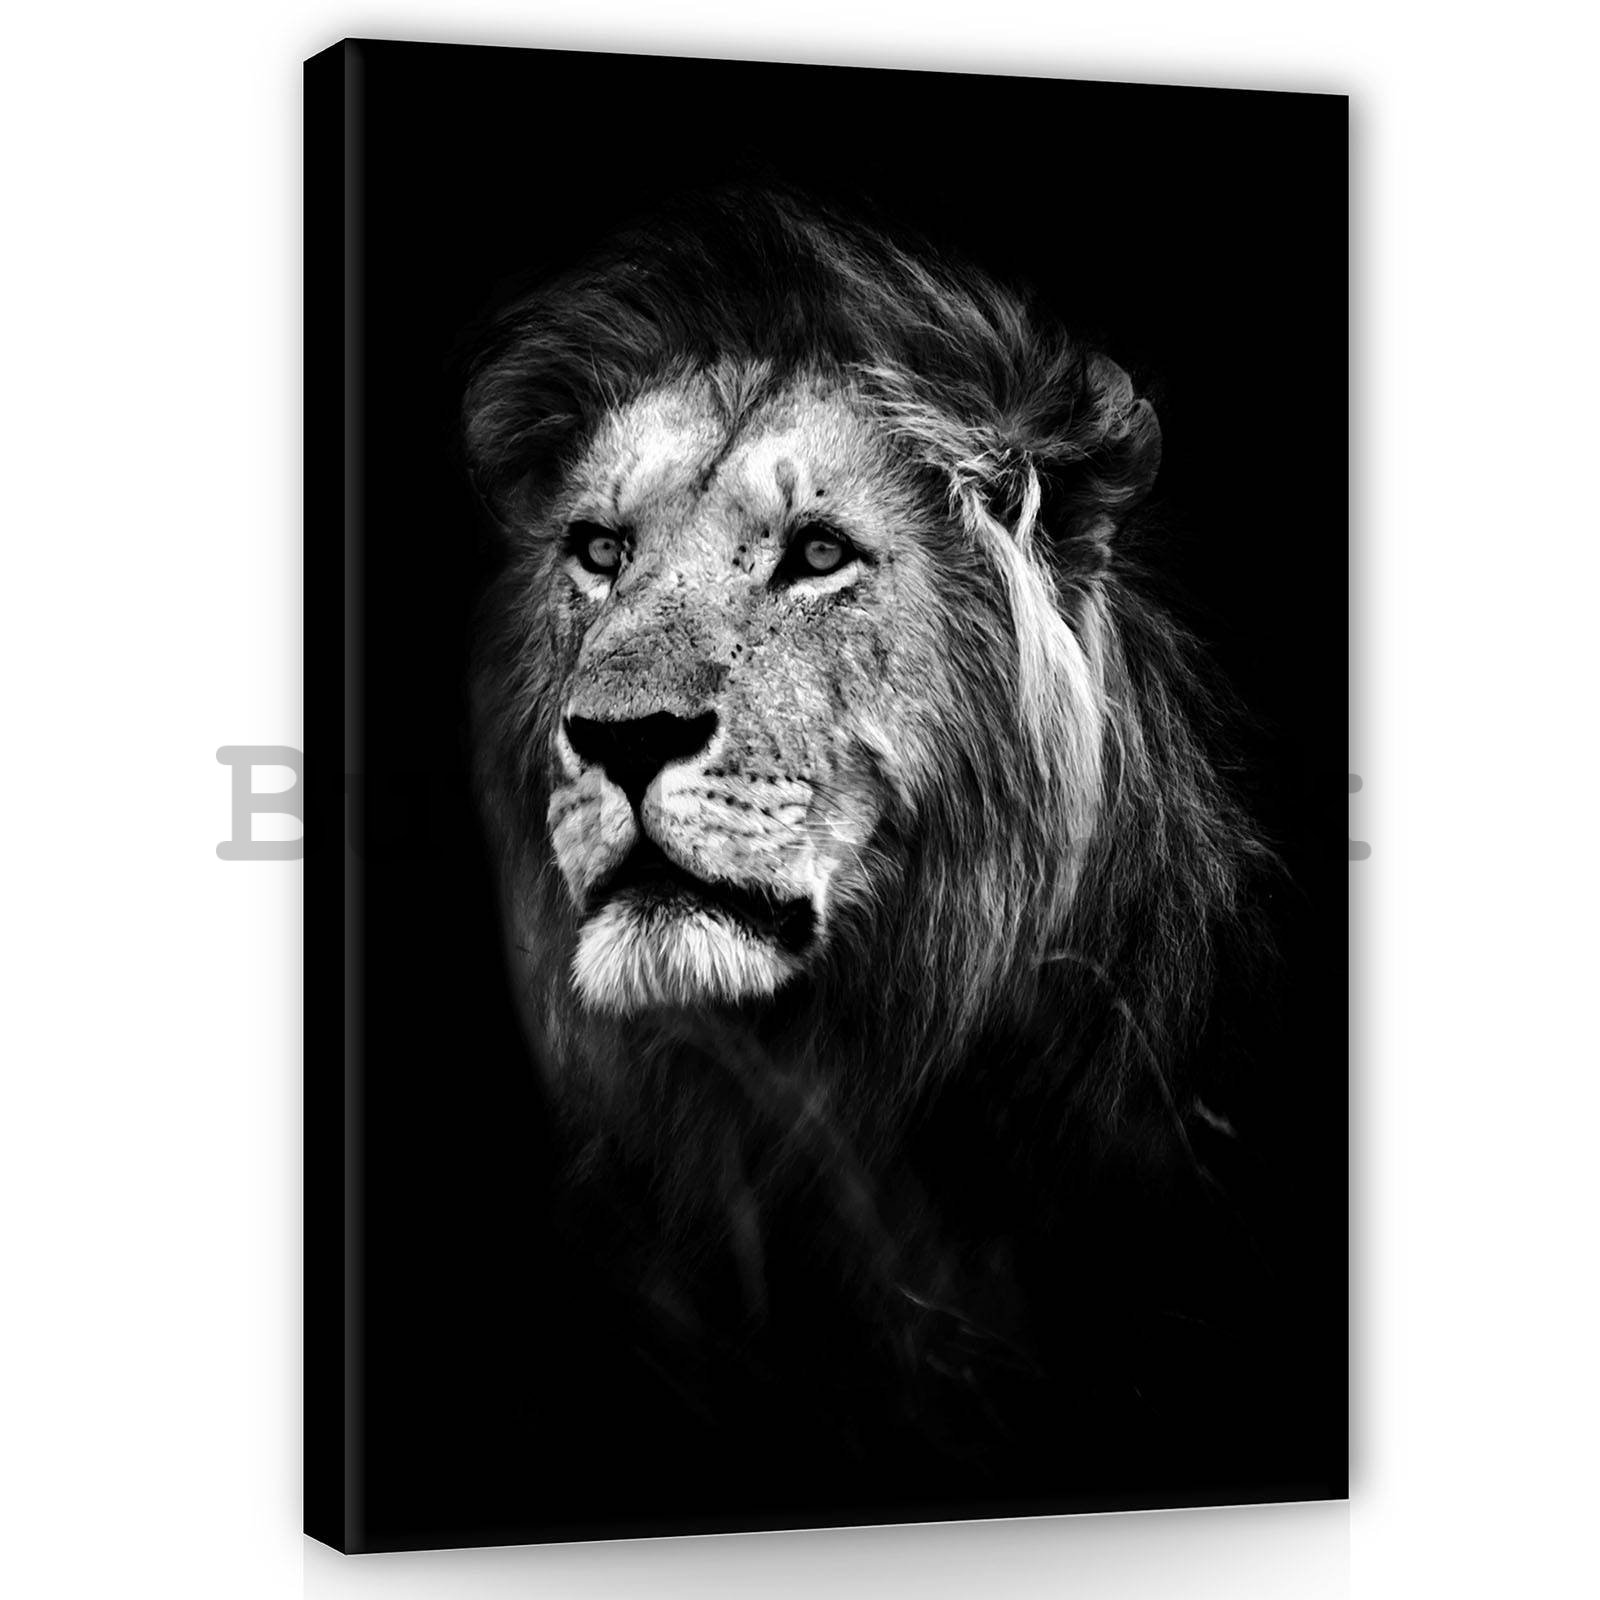 Painting on canvas: The Lion (5) - 60x80 cm